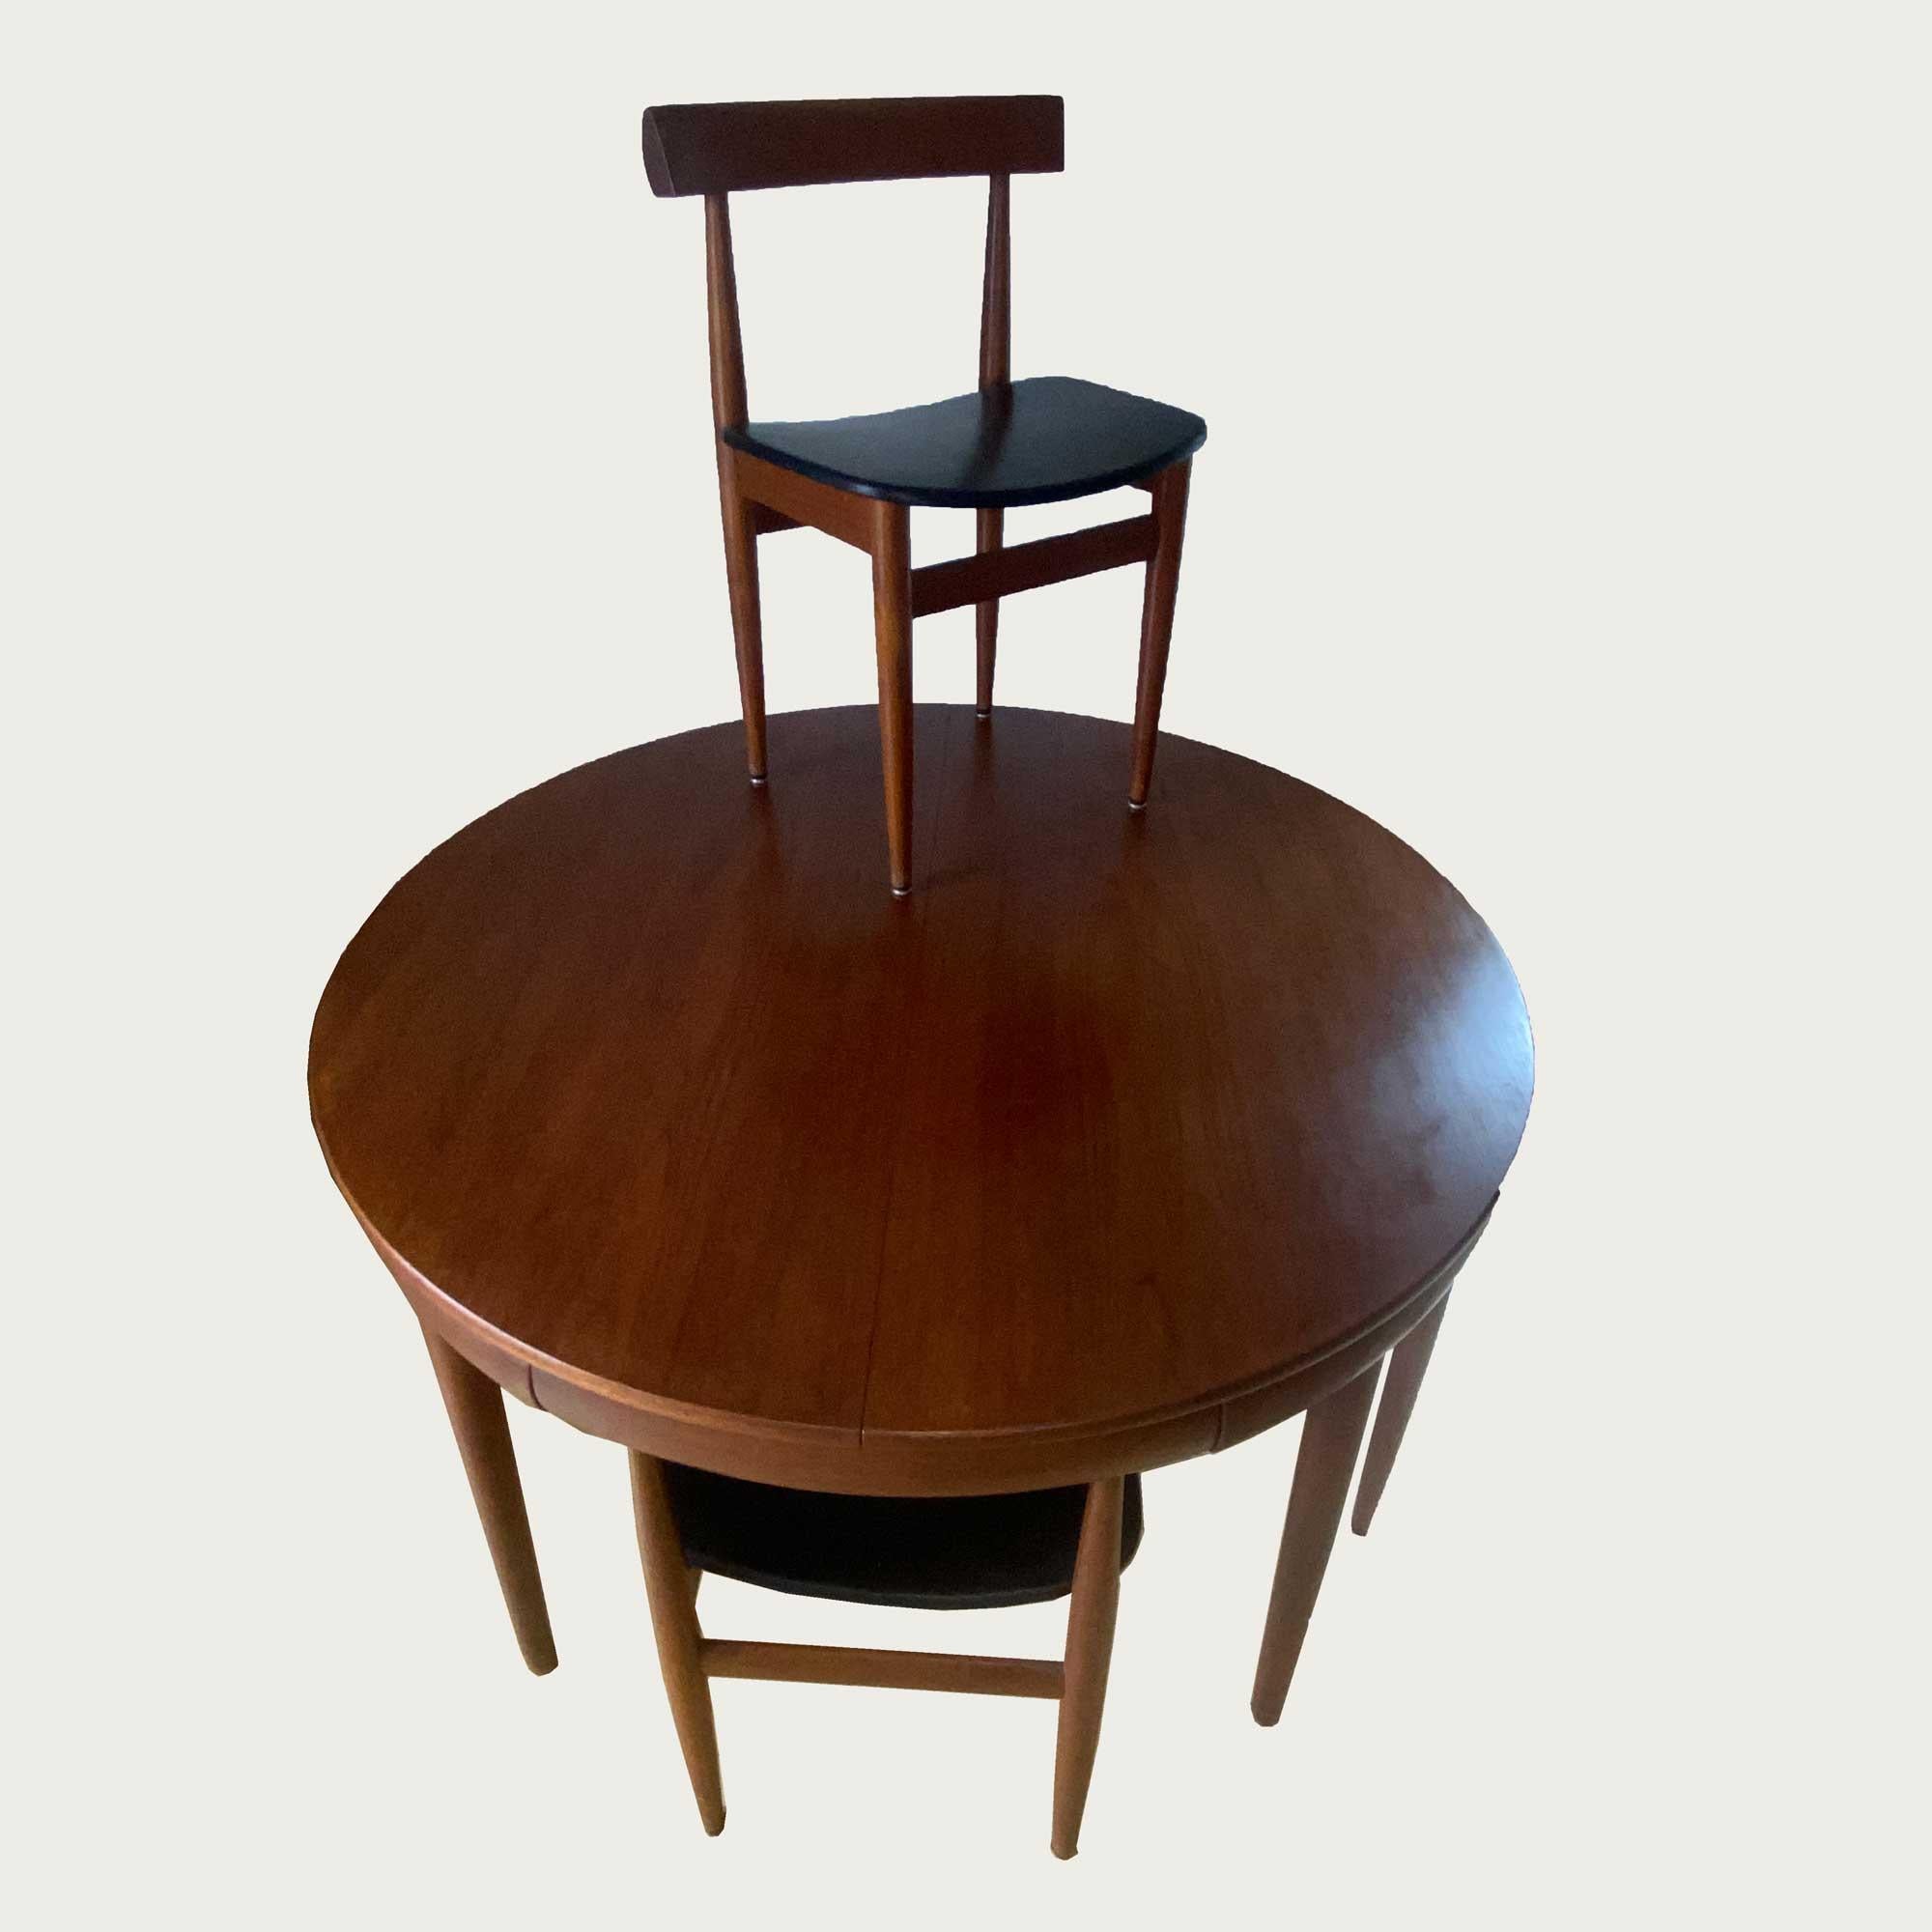 Mid century modern teak dining set by Hans Olsen for Frem Rojle, circa 1960s
beautiful teak set by Hans Olsen including an integrated extending table allowing dining for 8 people. The originality of this set, which has become a classic of